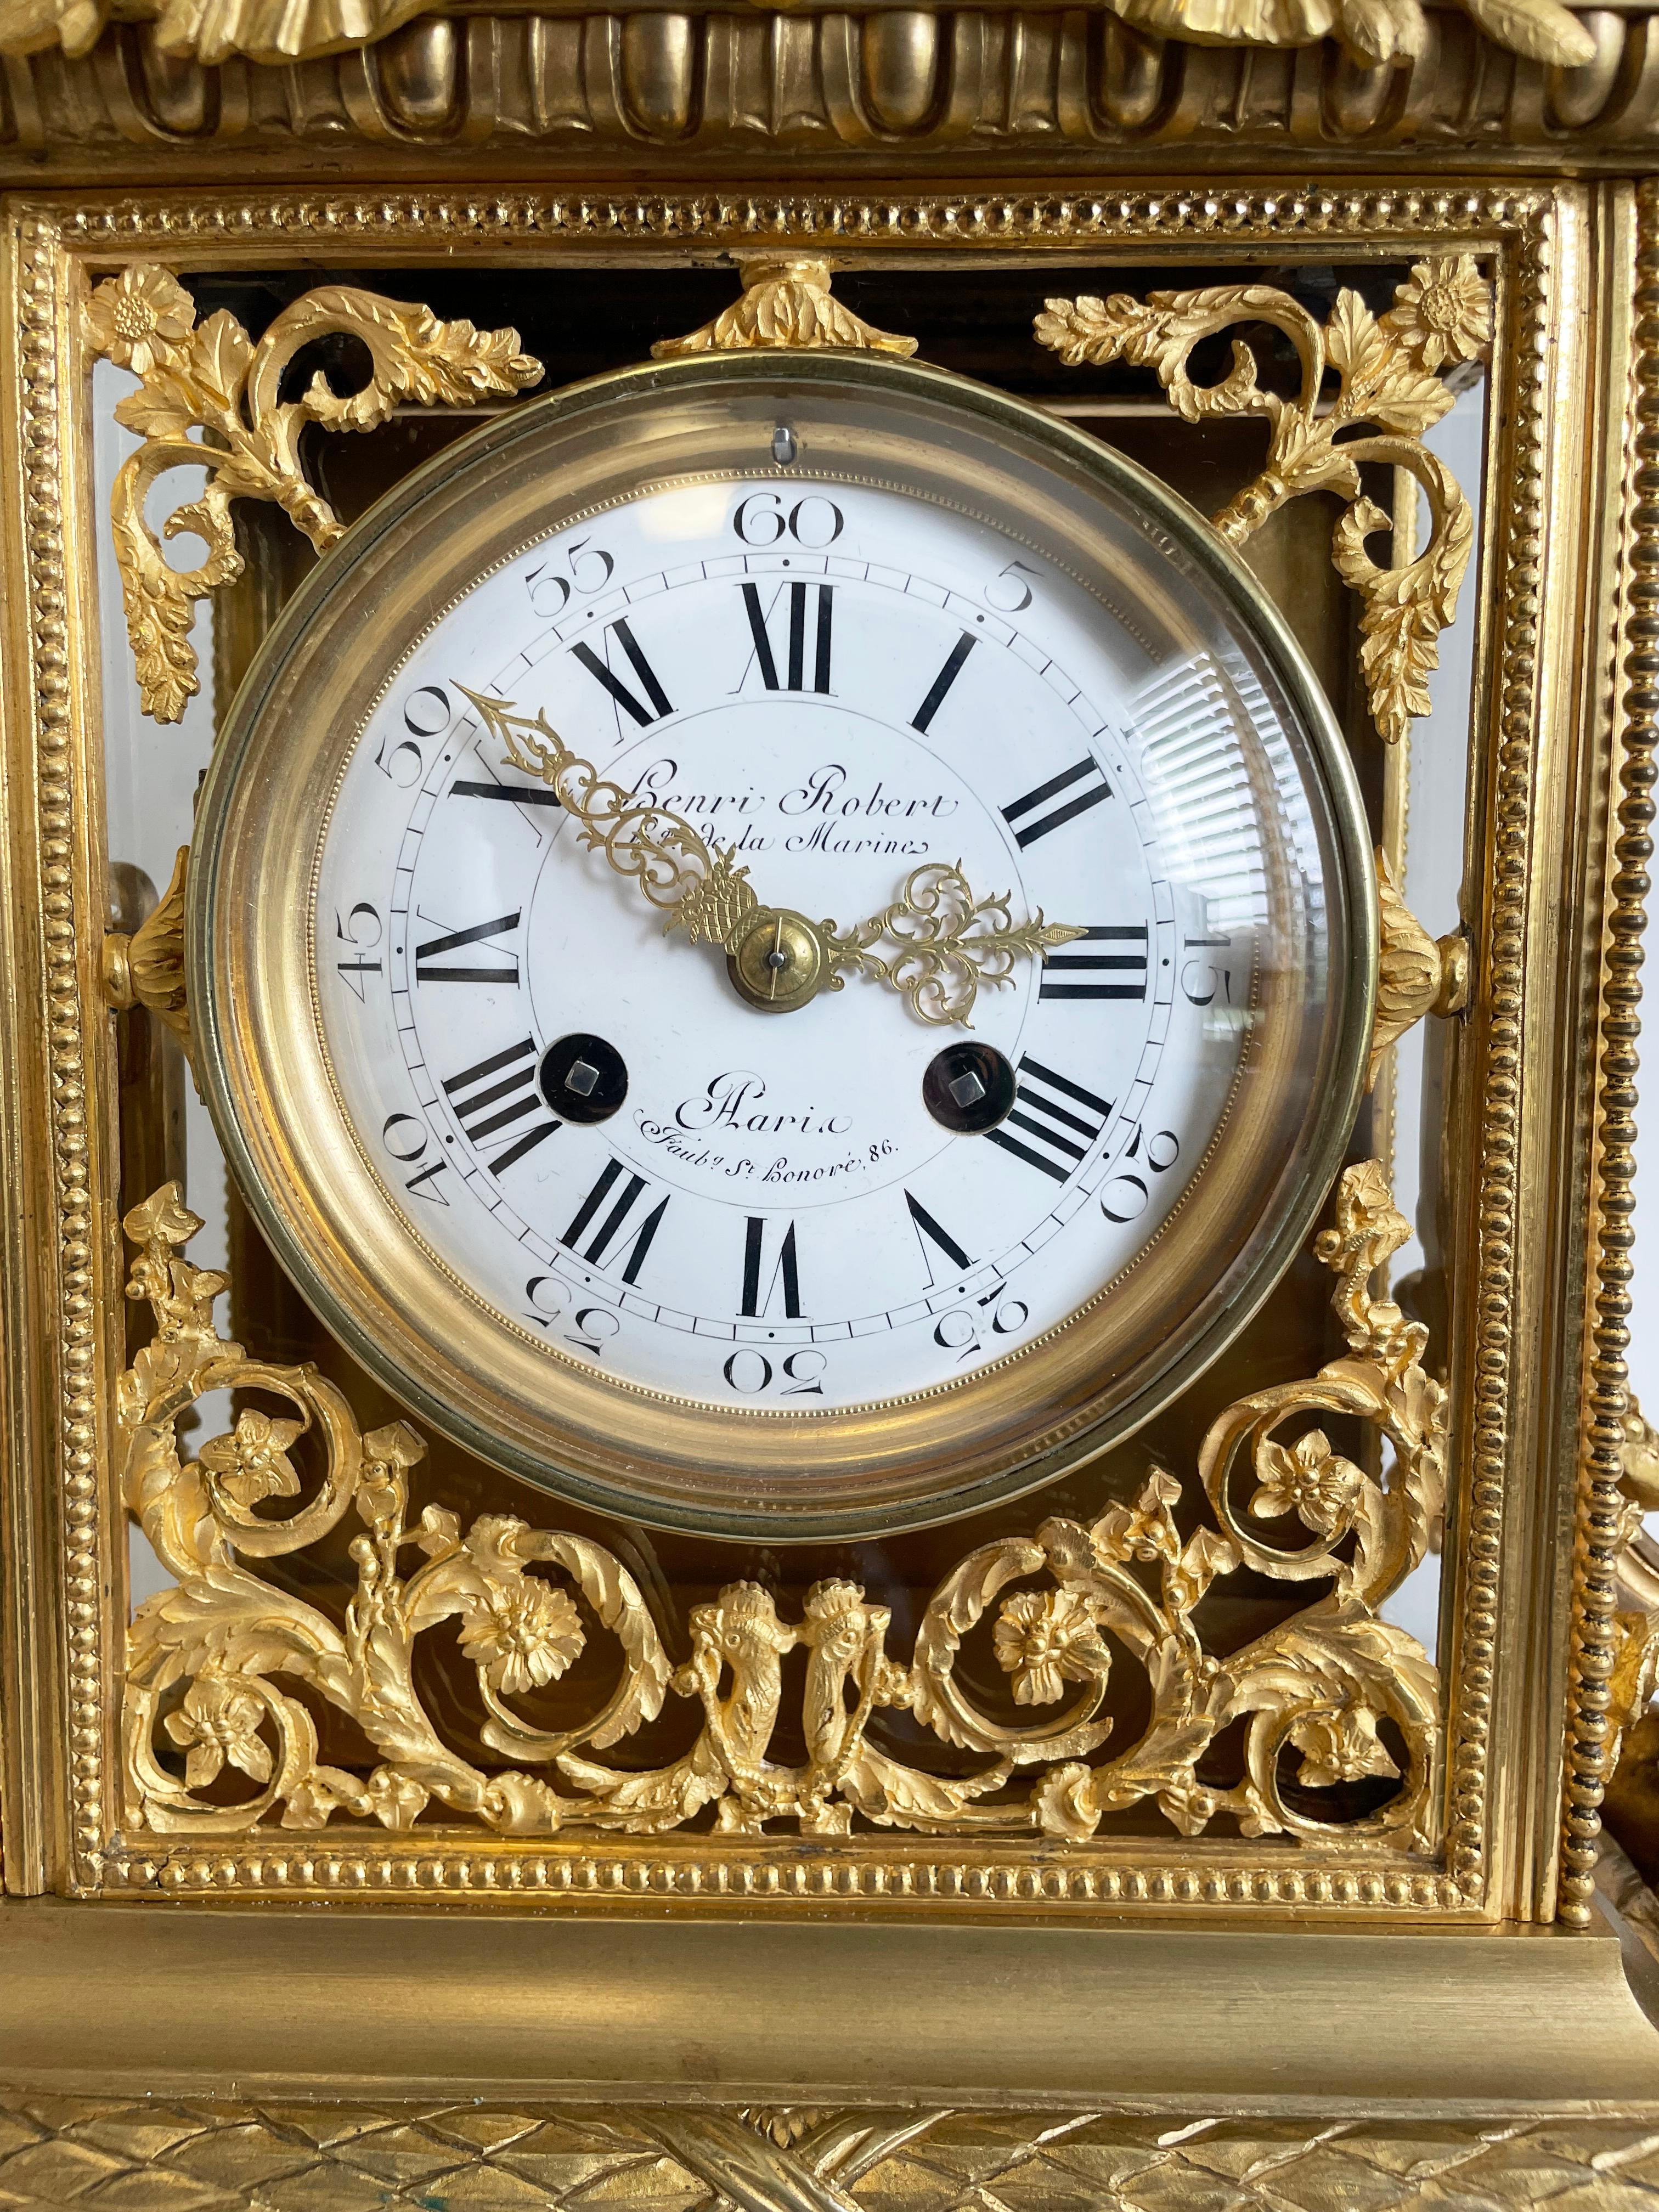 A French gilt bronze mantel clock by Henri Robert, circa 1880.

The decorative case with bevelled glass inserts, decorative floral swags and surmounted by a floral draped urn.

The ceramic dial with Roman numerals inscribed 'Henri Robert Hgr. de la